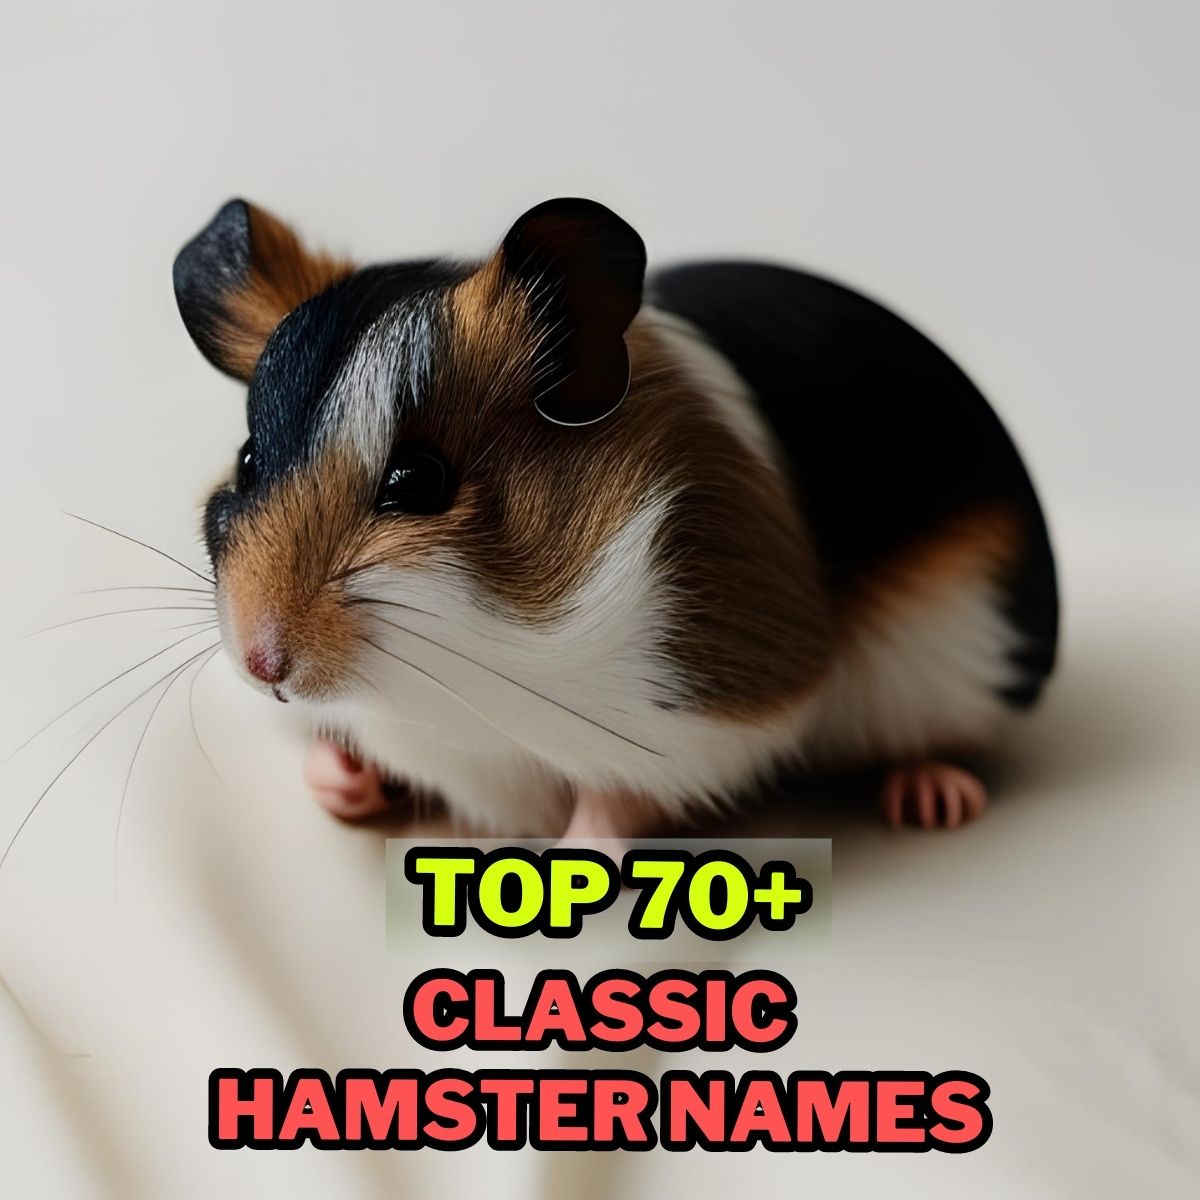 Classic Hamster Names - Our Top 70+ Picks!